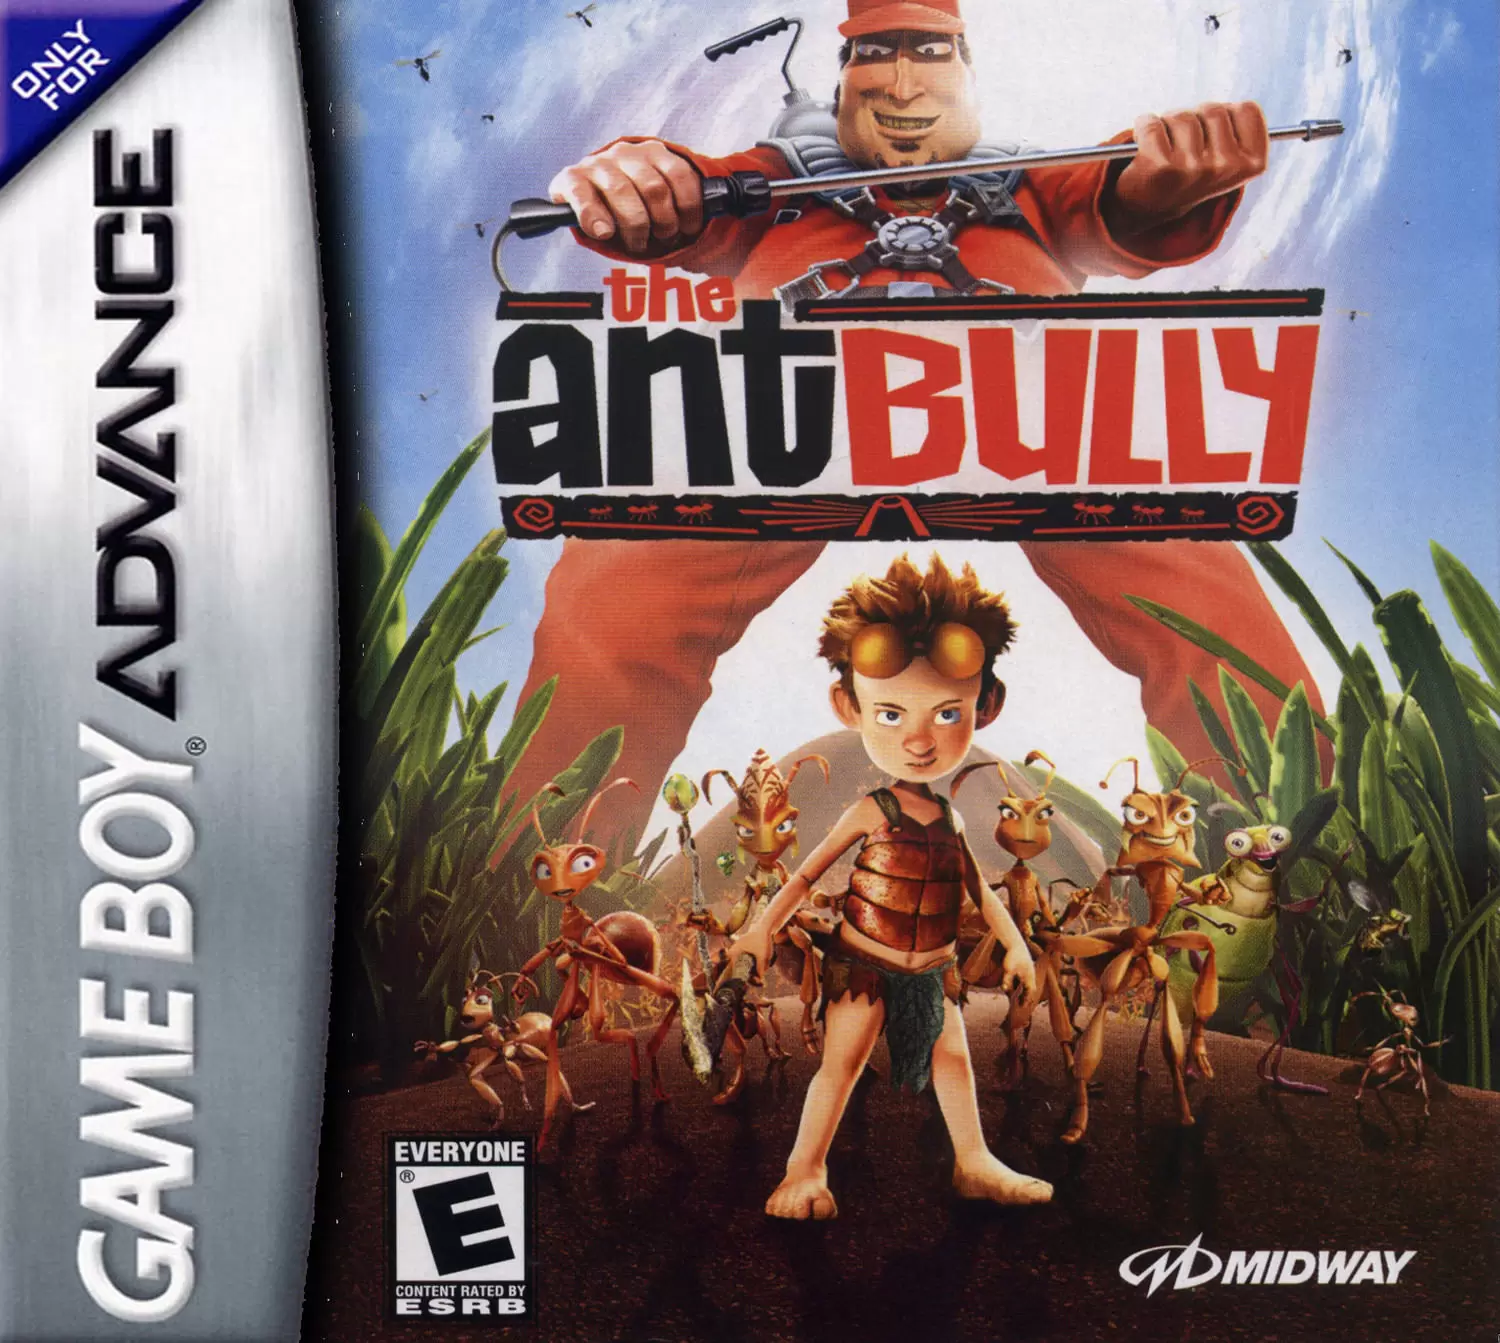 Game Boy Advance Games - The Ant Bully